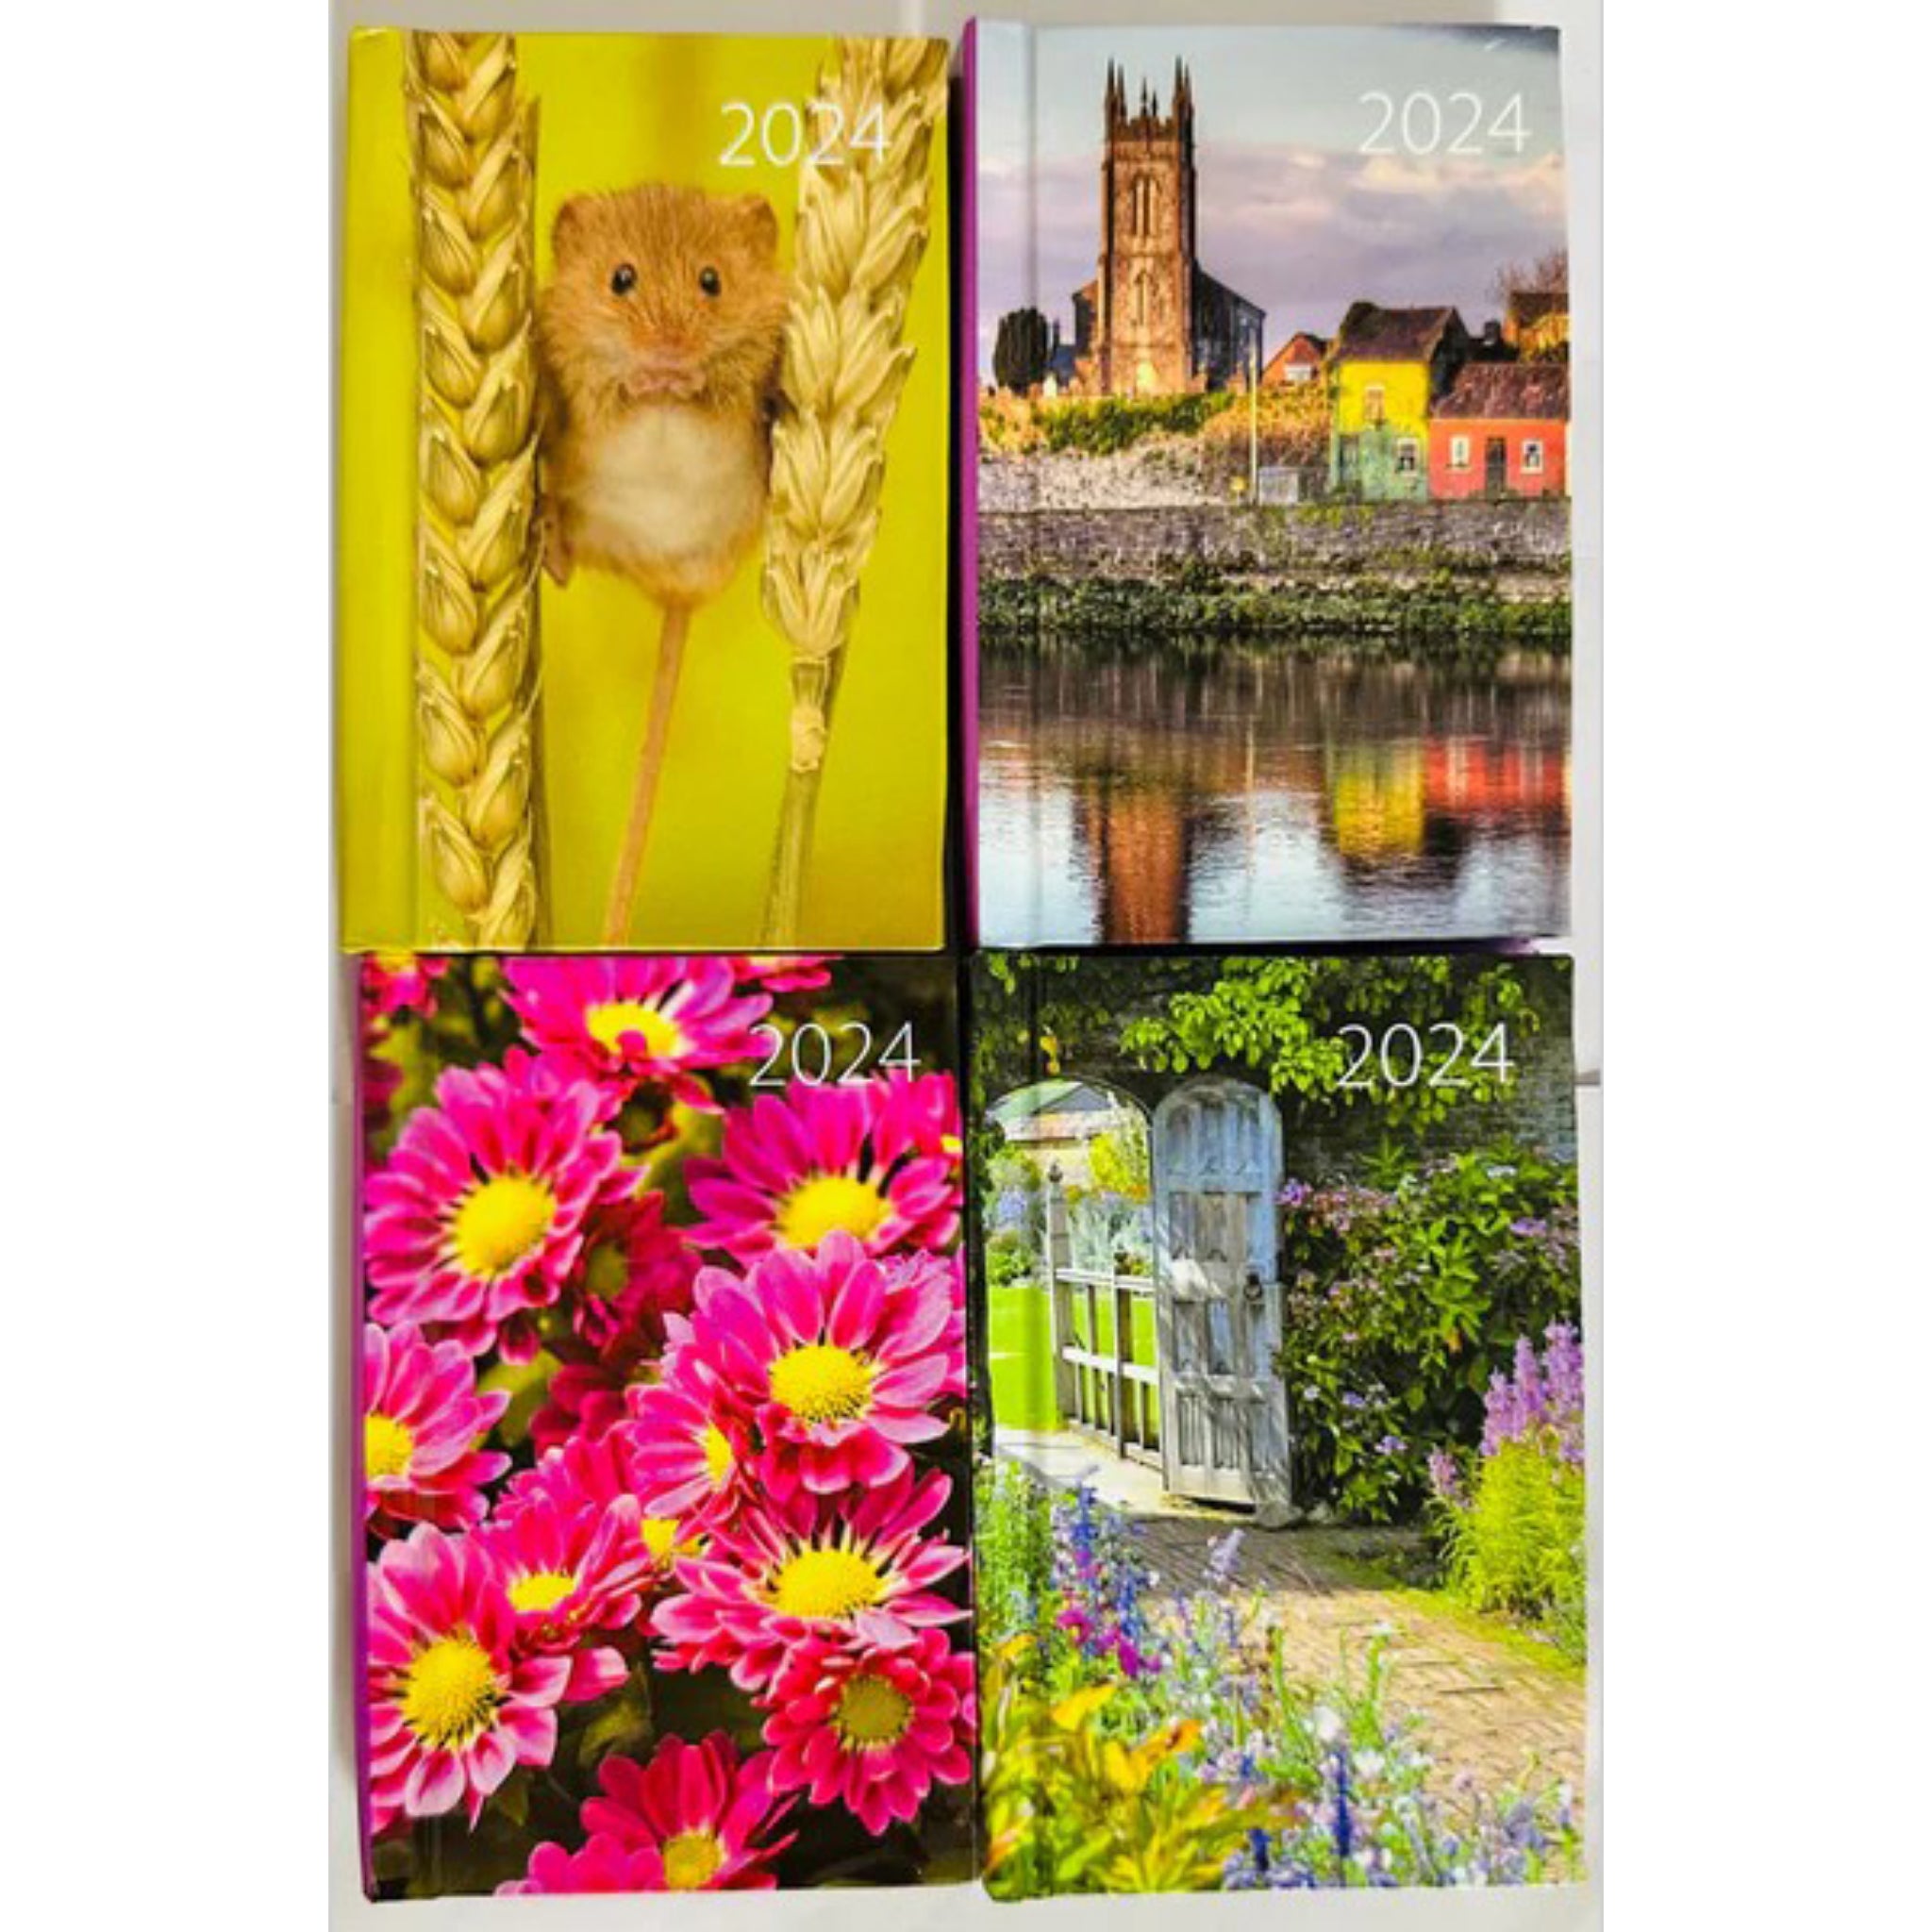 Beclen Harp 2024 Slim wall Calendar Month to View Home office School Calendar With Daily Notes & Pocket Diary/ Spiral Bound Hanging Wall Calendar Flower Garden Wildlife Scenes